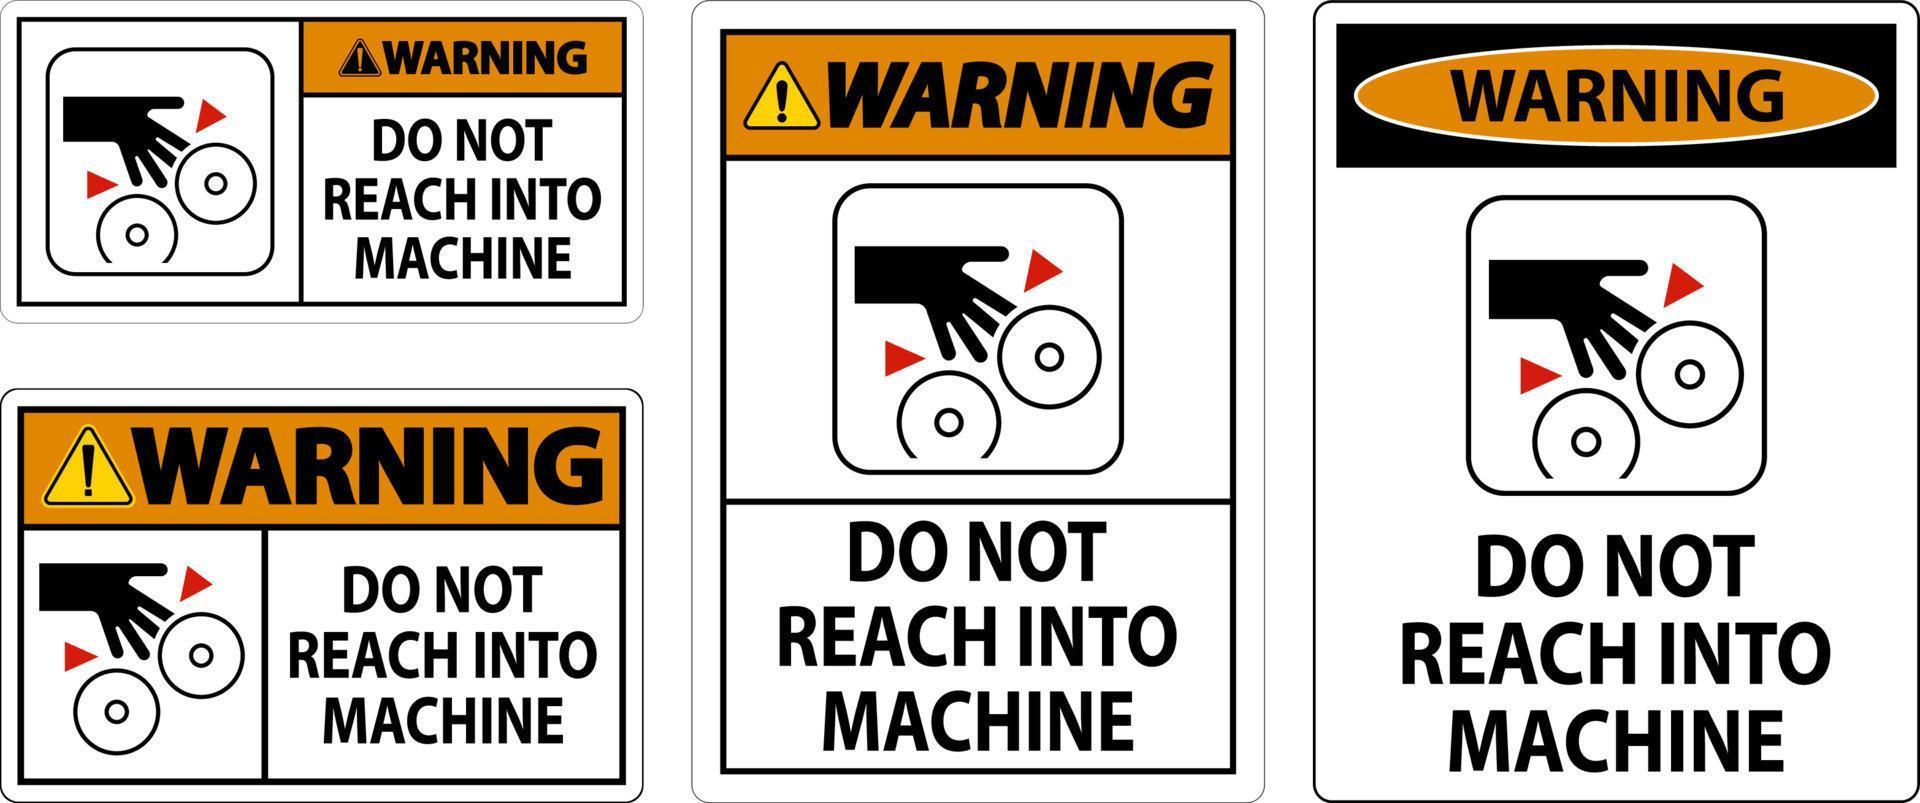 Warning Sign Do Not Reach Into Machine vector